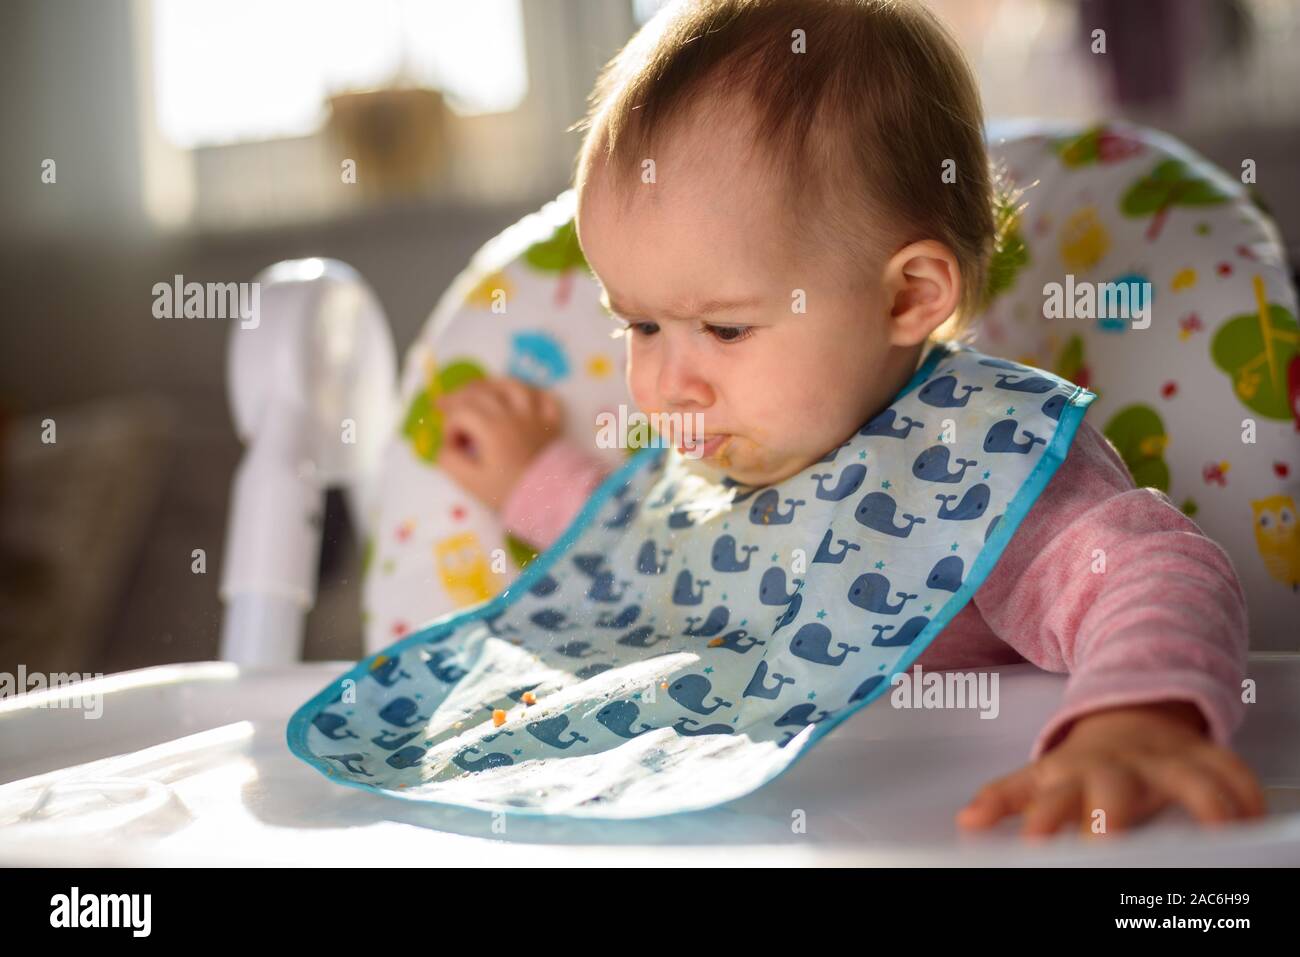 627 Baby 6 12 Months Eating Royalty-Free Images, Stock Photos & Pictures